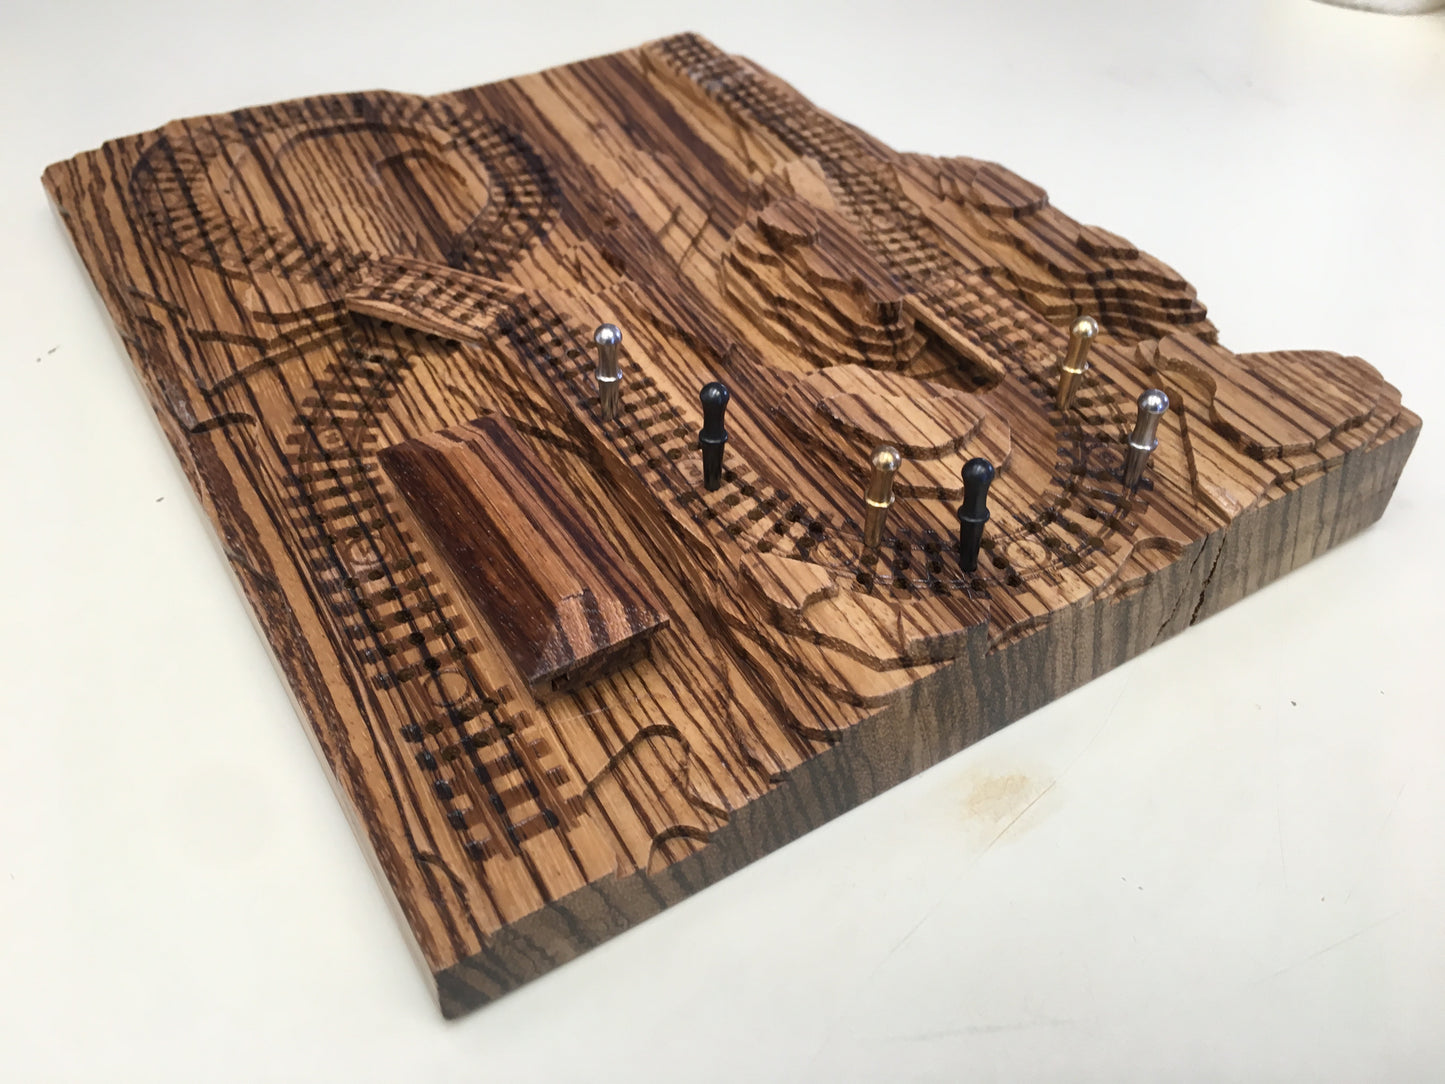 Zebrawood 'From the Mountains to the Coast' Railroad Cribscape